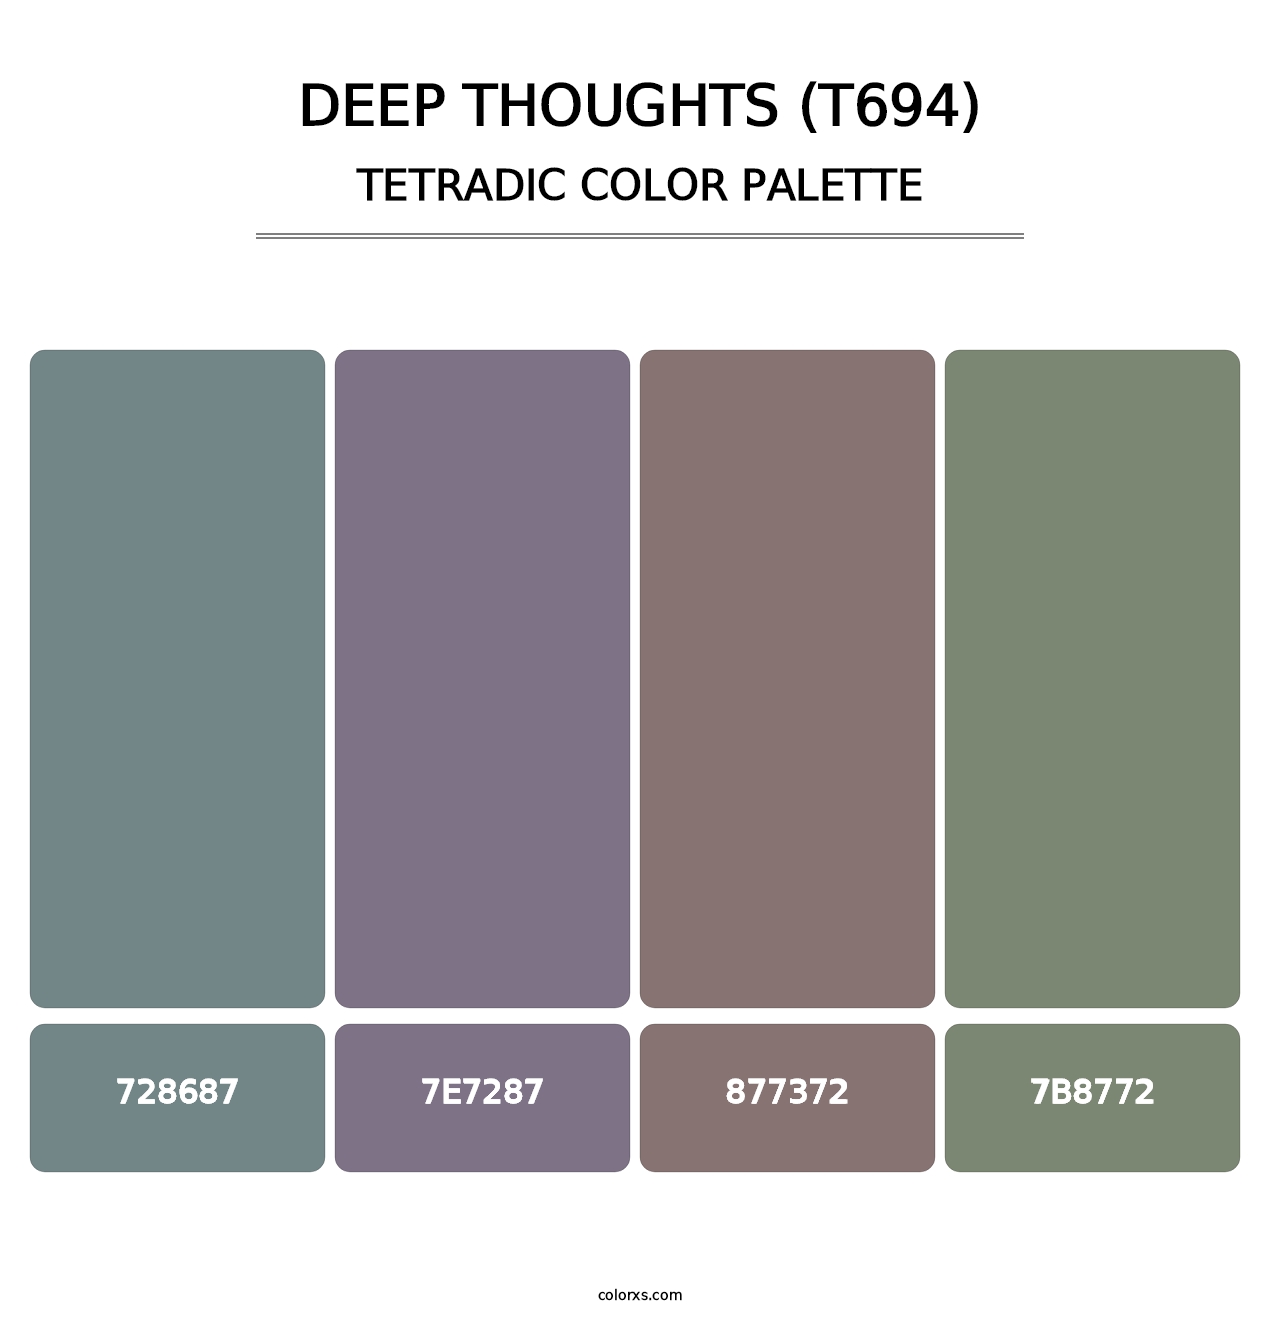 Deep Thoughts (T694) - Tetradic Color Palette